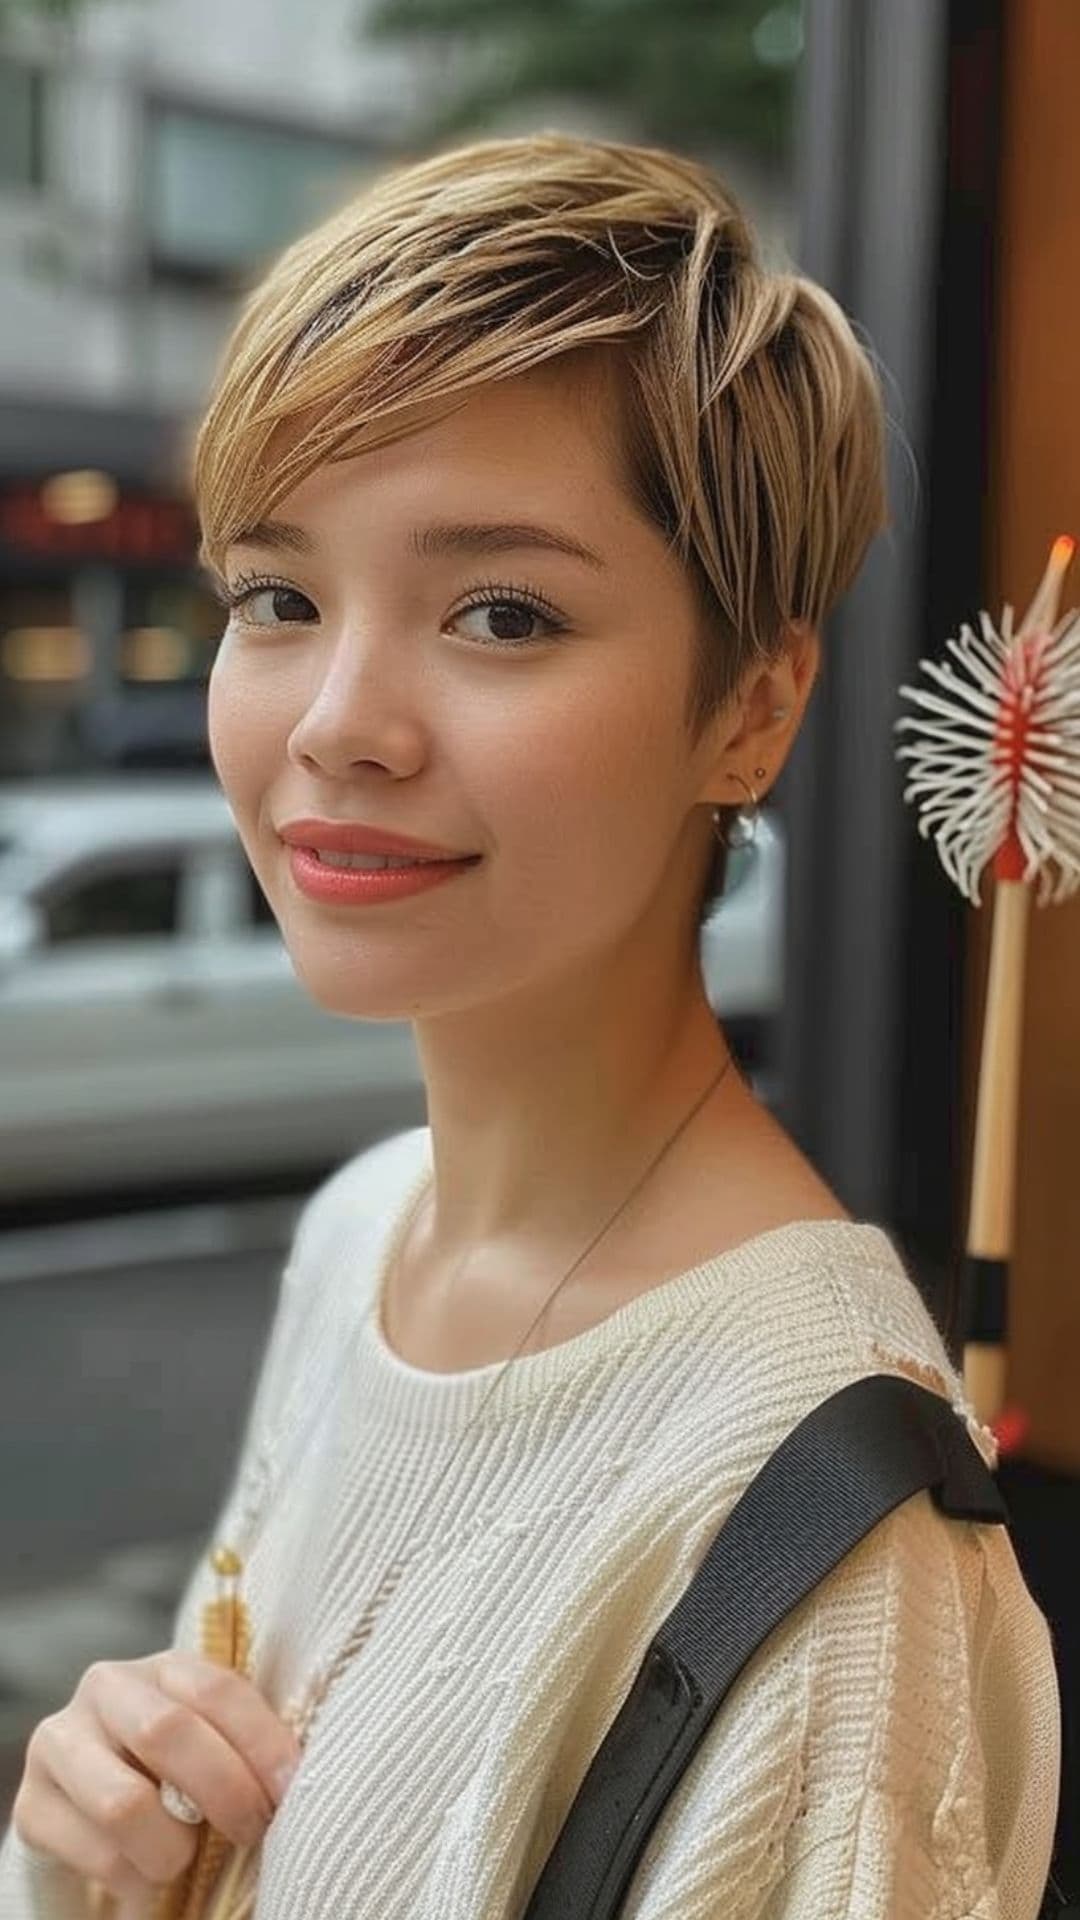 A woman modelling a sleek pixie cut with side part.